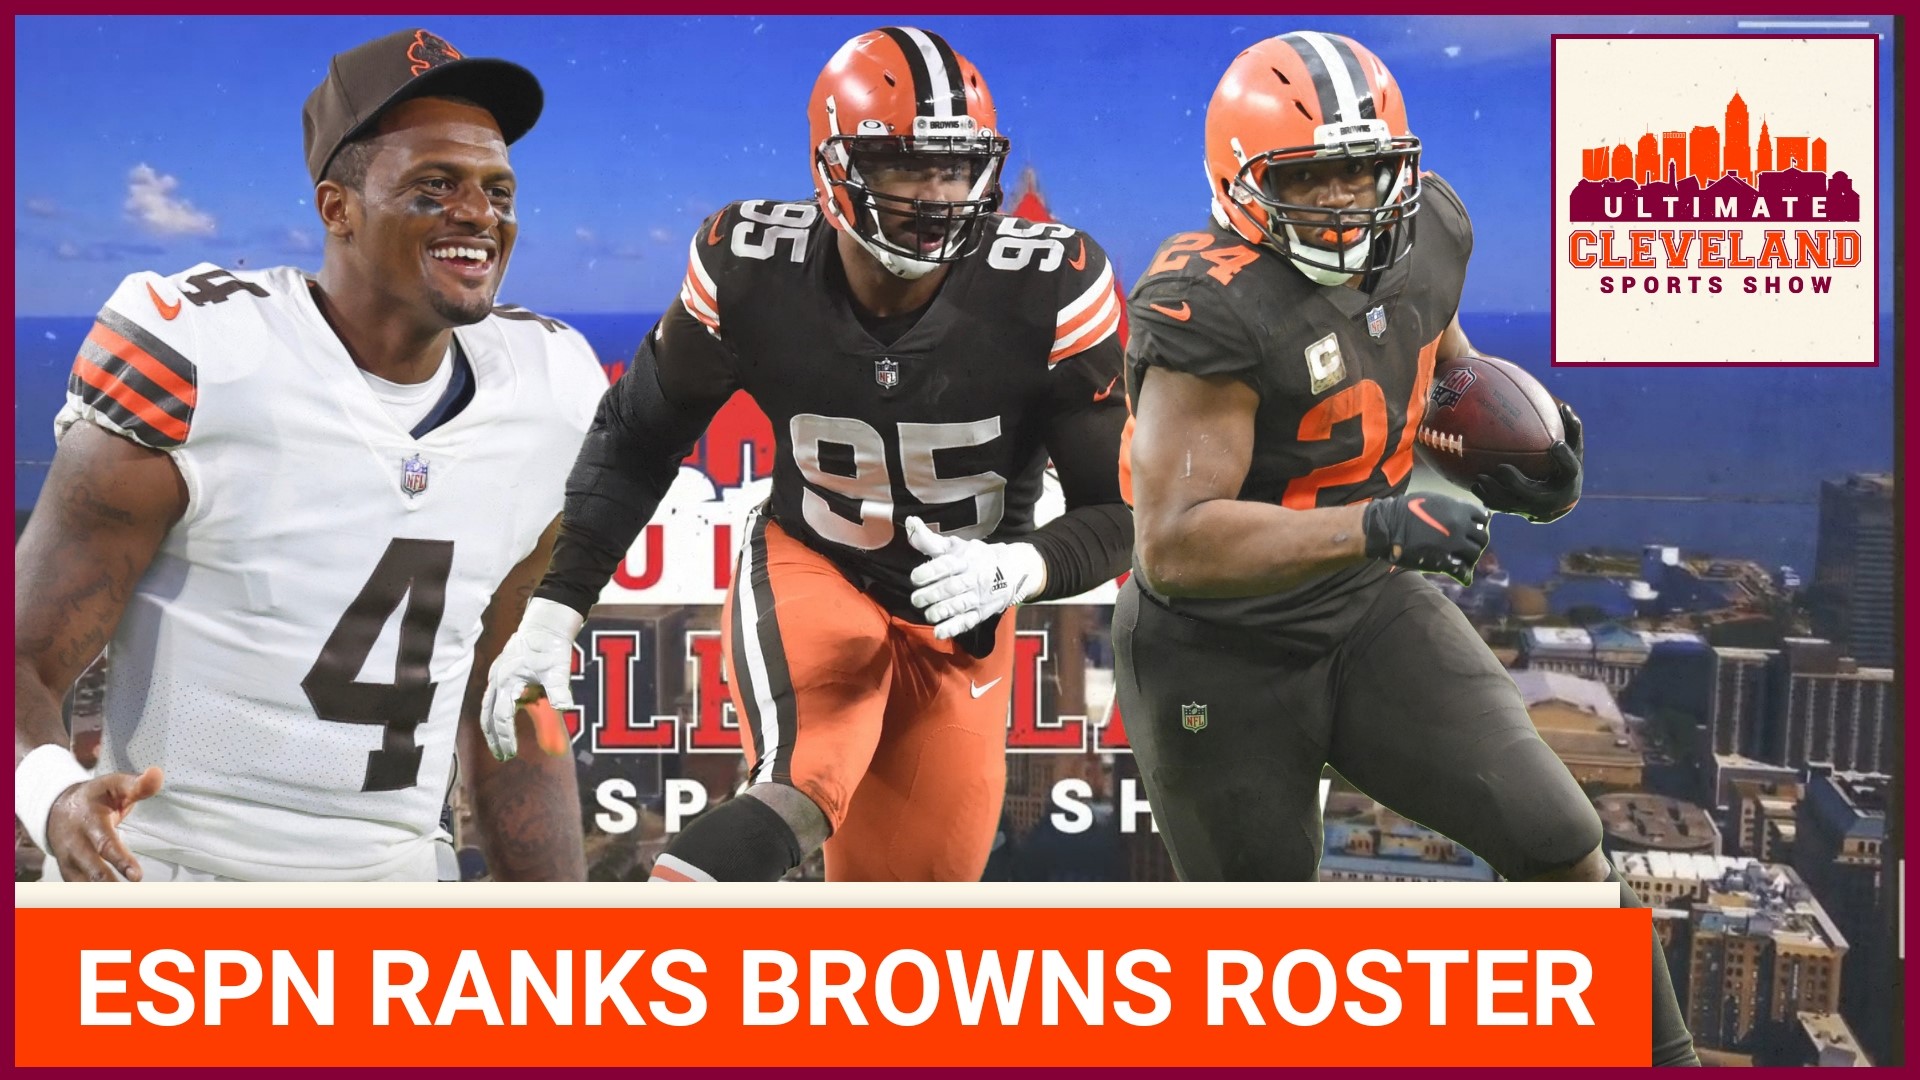 The Cleveland Browns roster ranked 9th by ESPN. Are the Browns more